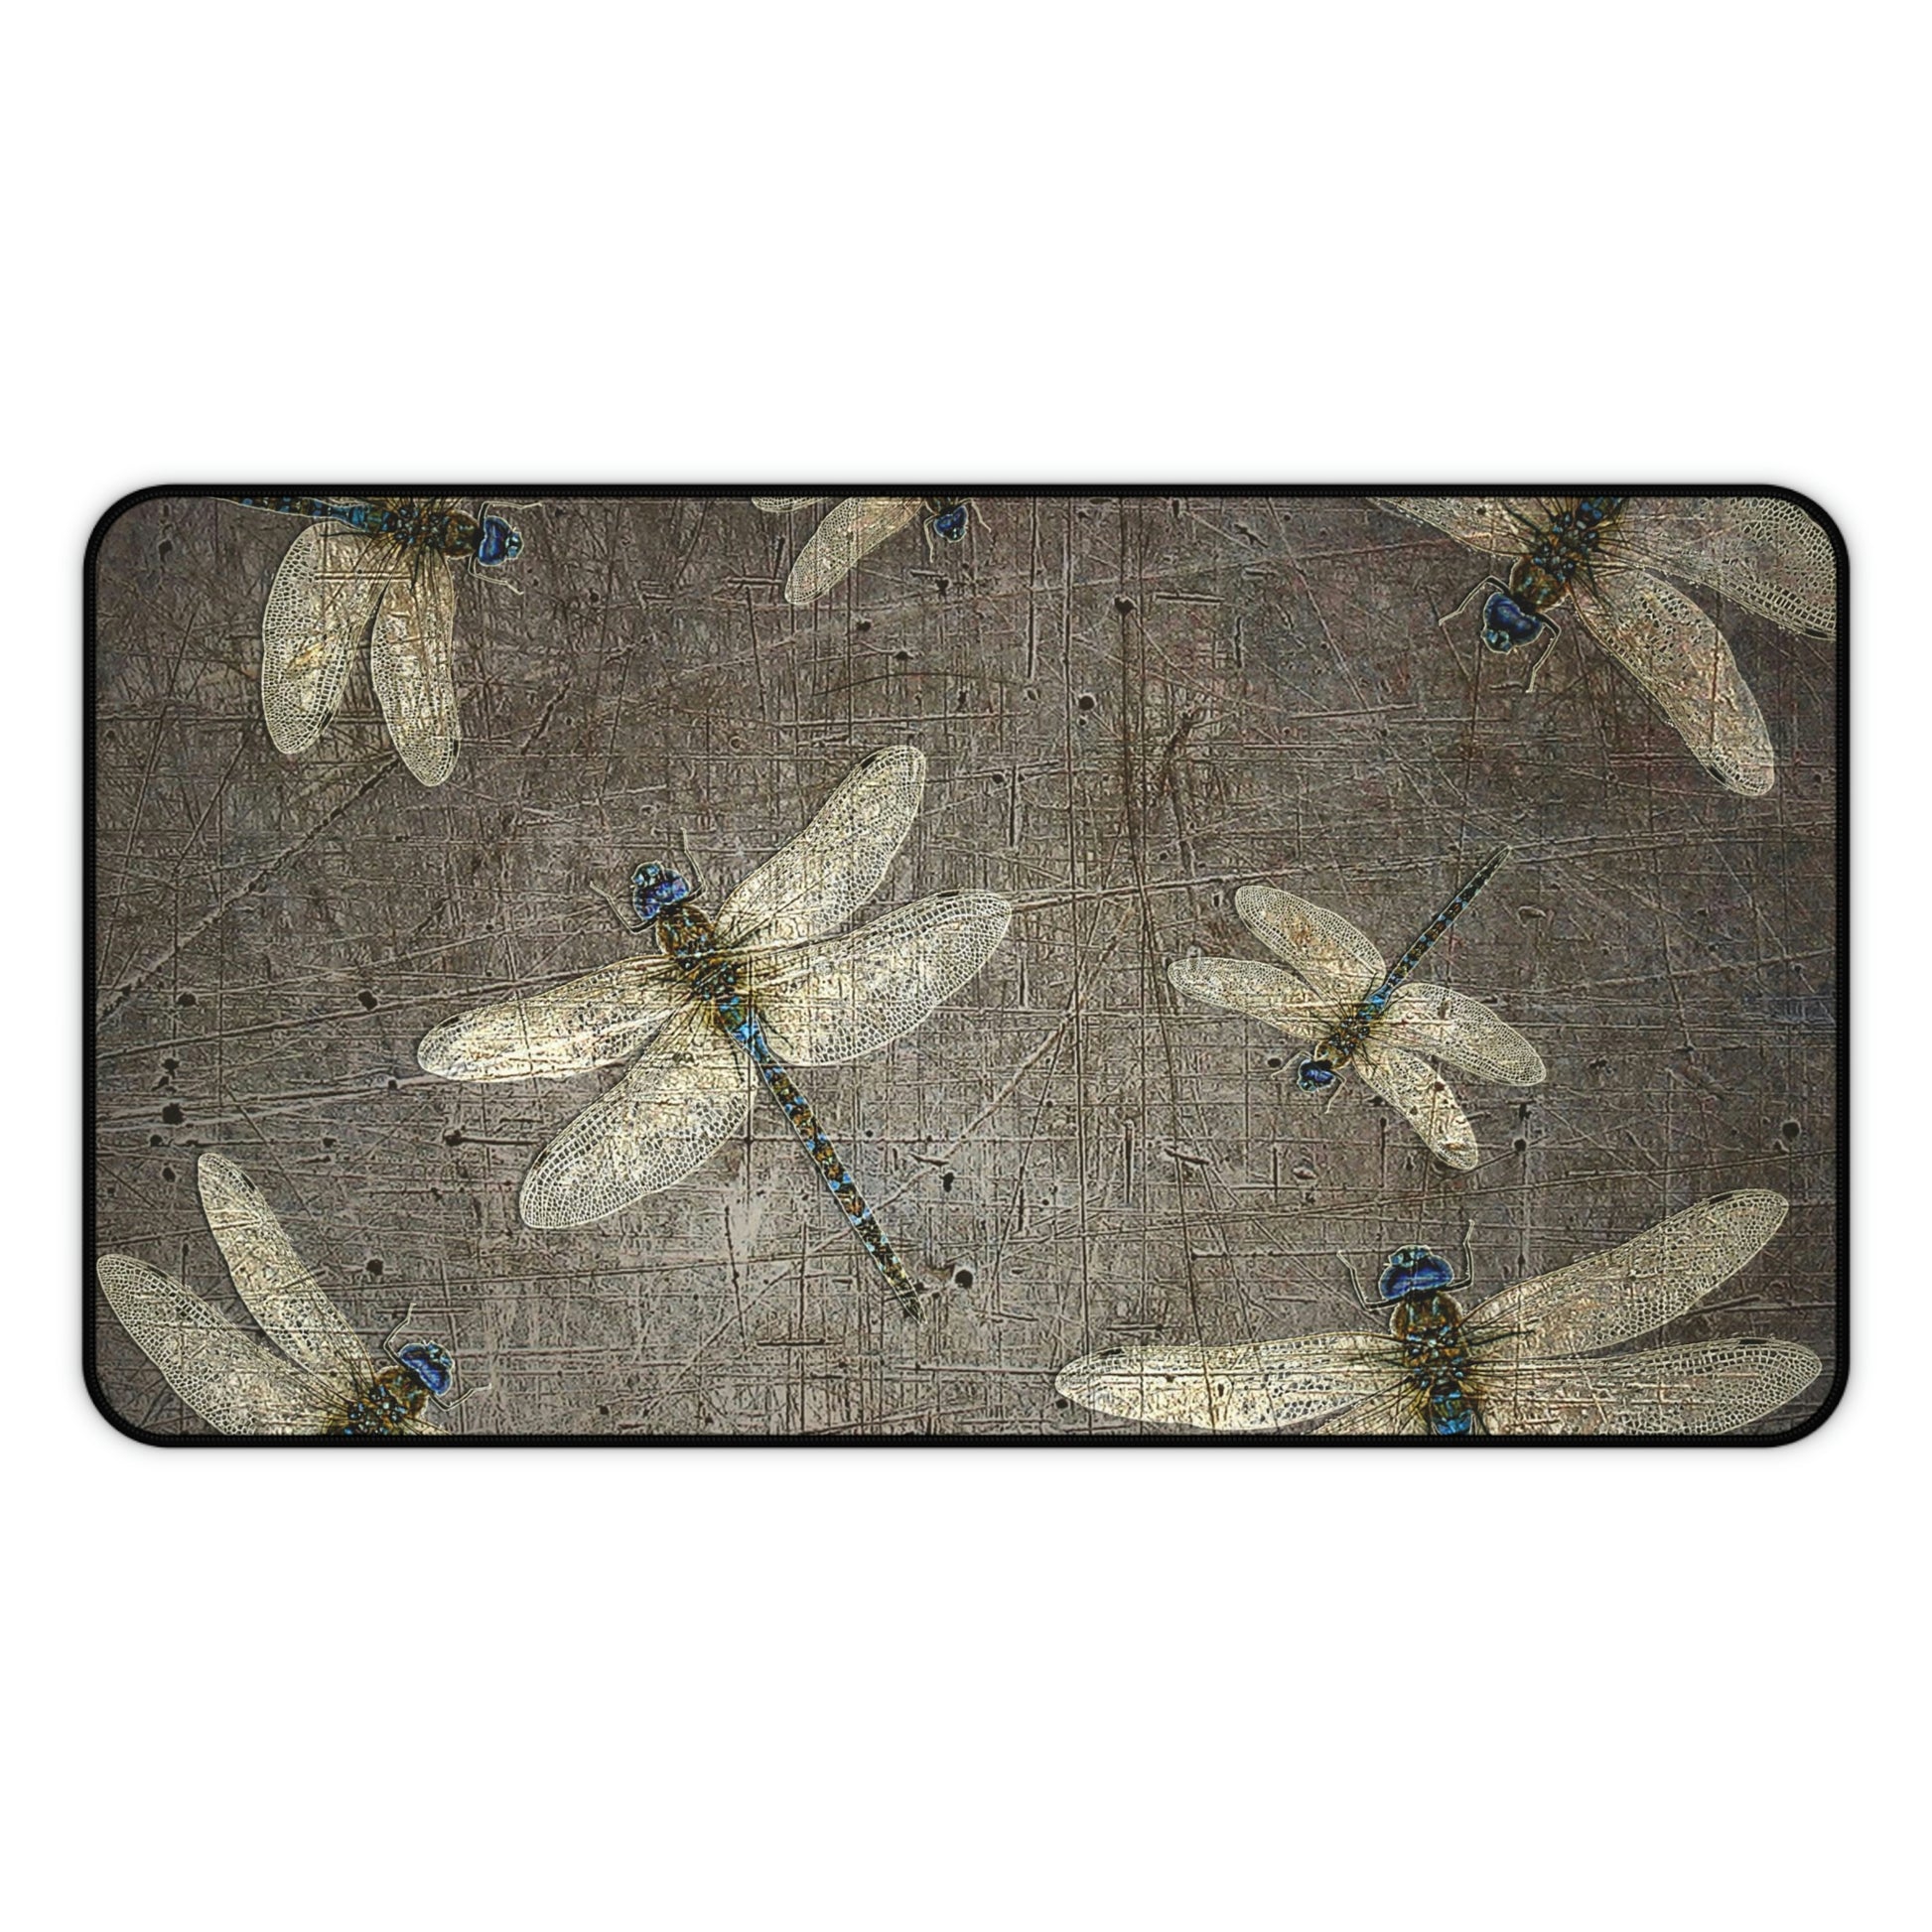 Dragonfly Desk Mat - Flight of Dragonflies on Distressed Grey Background Print 12x22